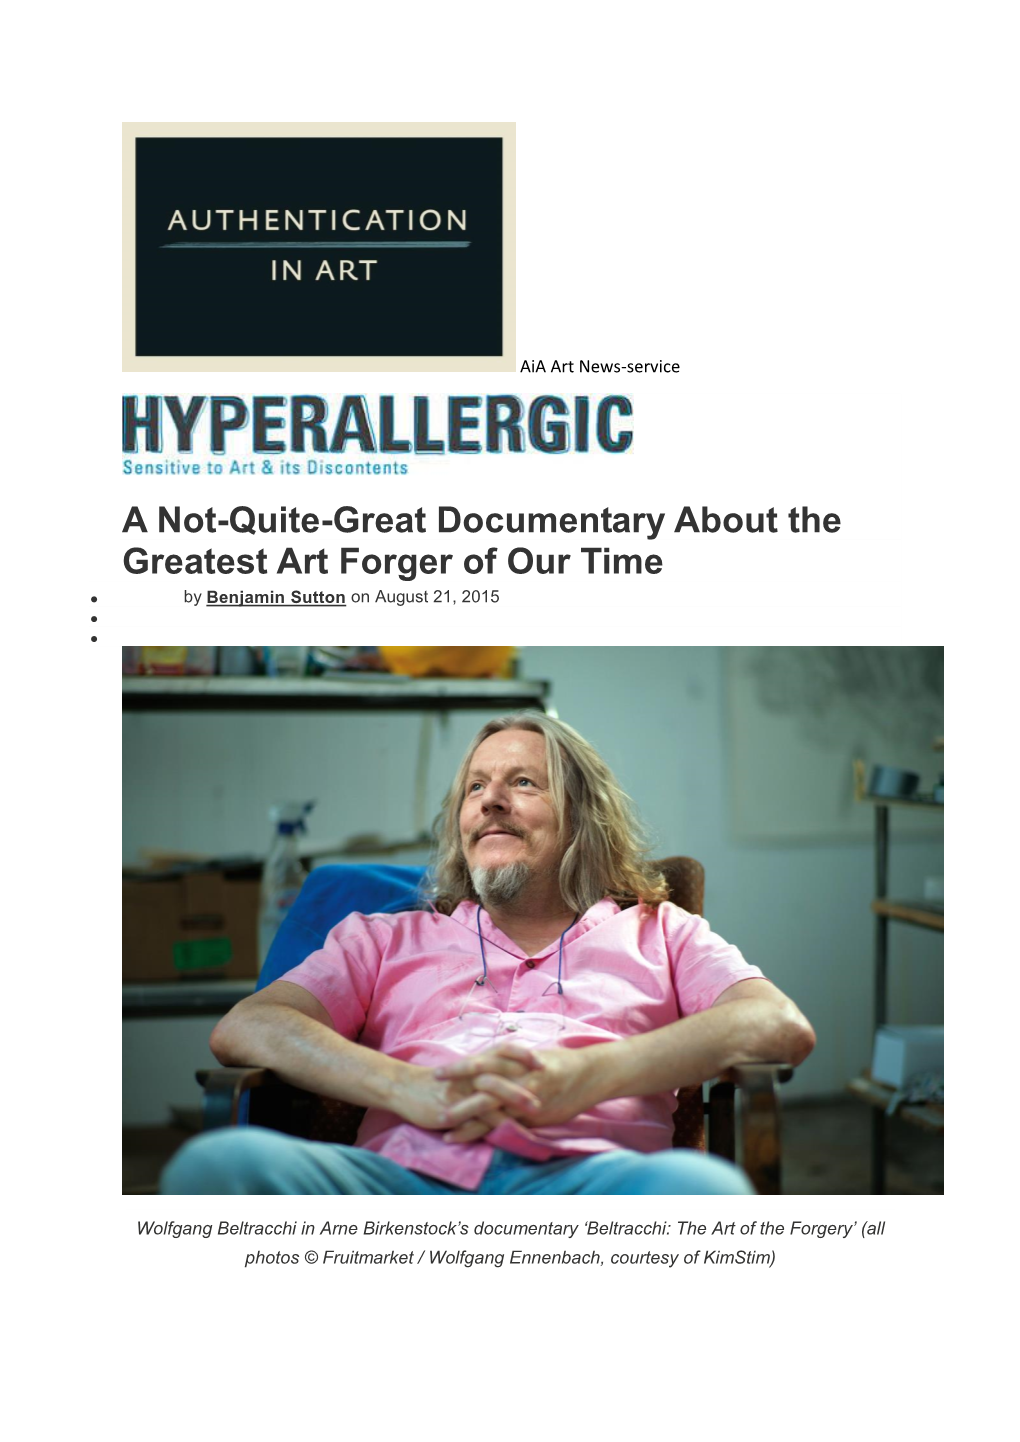 A Not-Quite-Great Documentary About the Greatest Art Forger of Our Time  by Benjamin Sutton on August 21, 2015  